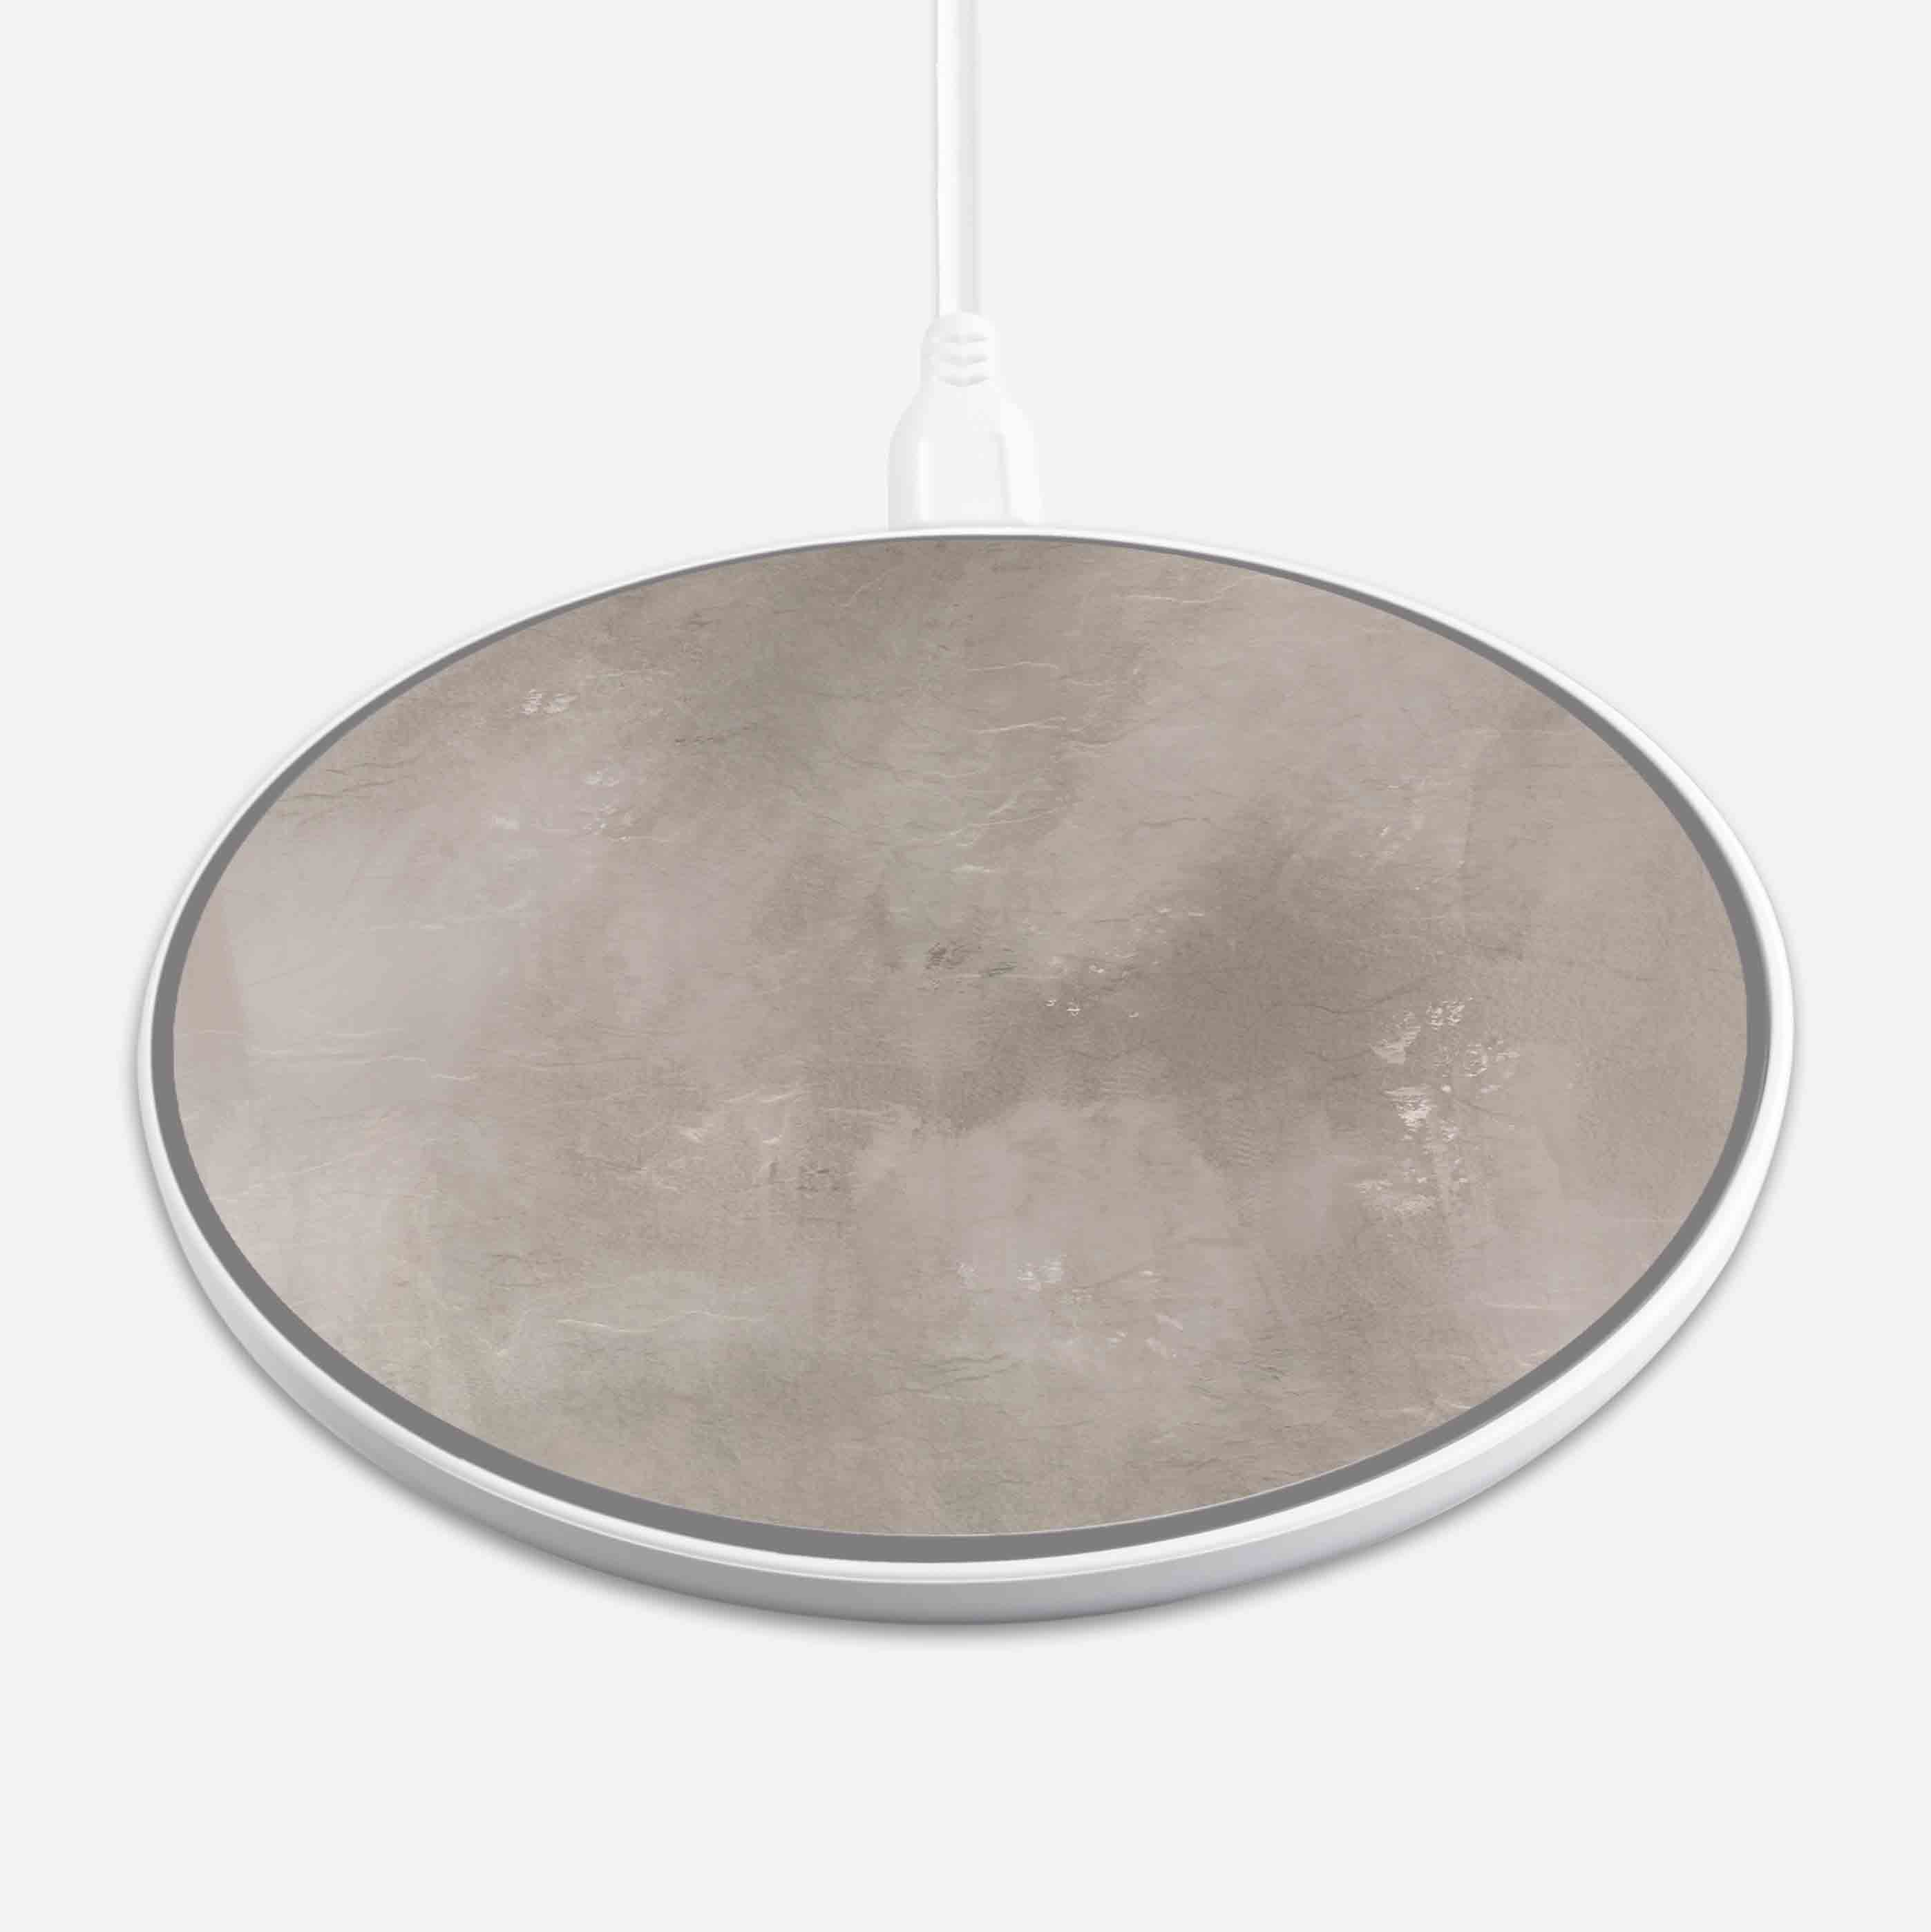 Wireless Charging Pad - Concrete Design (Front View)